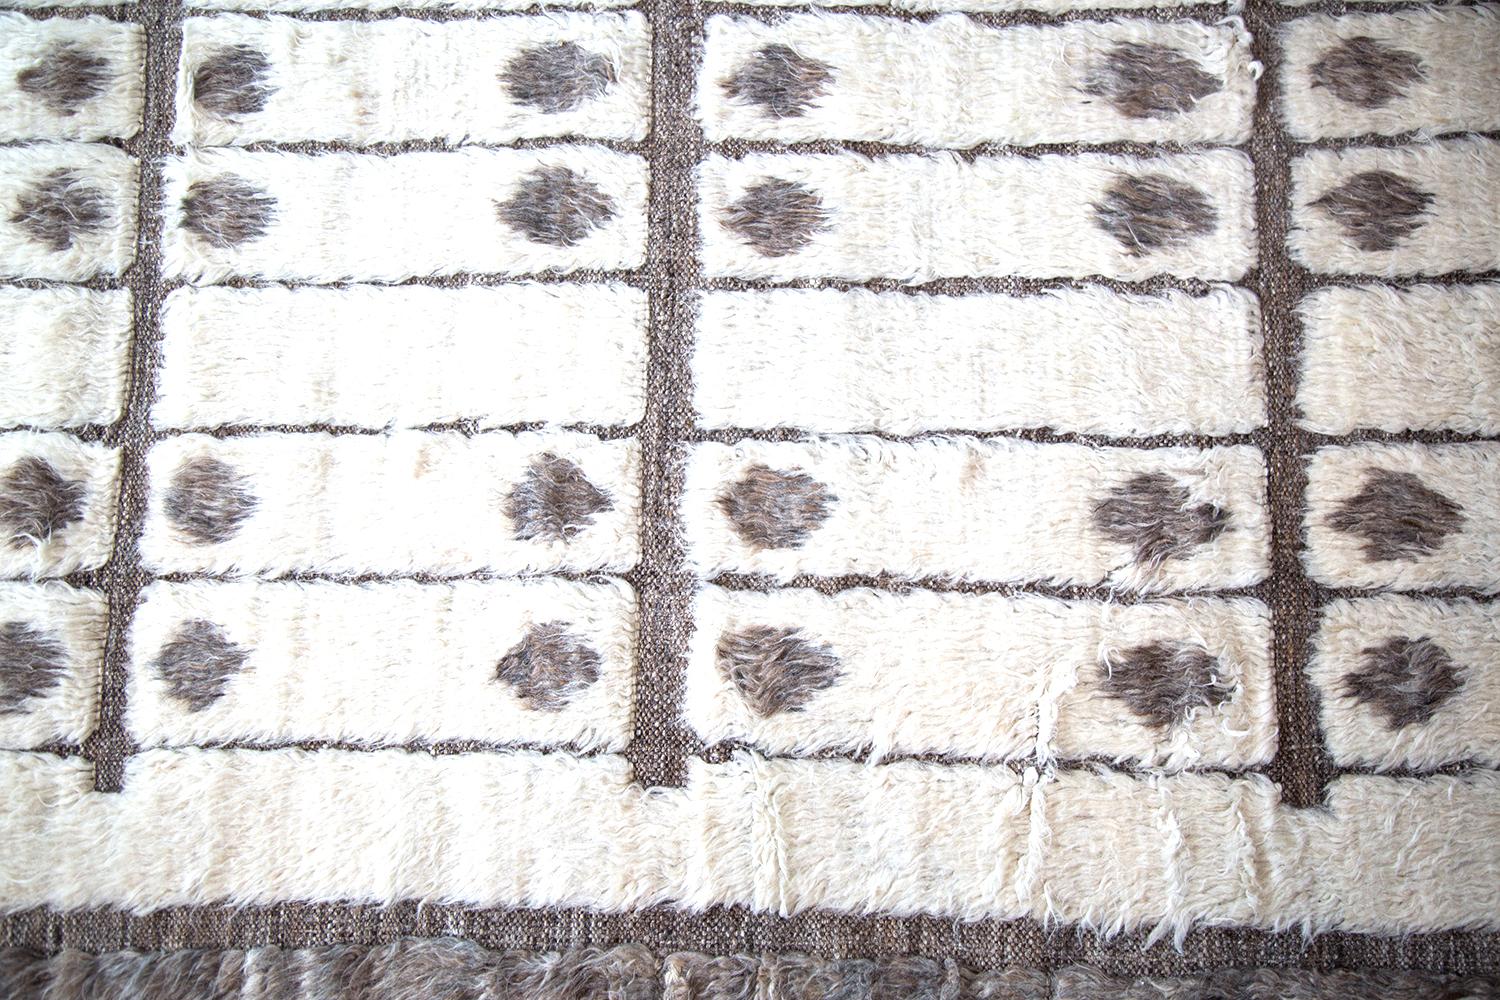 Hand-Knotted Modern & Trendy Boho Chic Rug from Central Asia. Size: 11 ft 5 in x 12 ft 7 in 